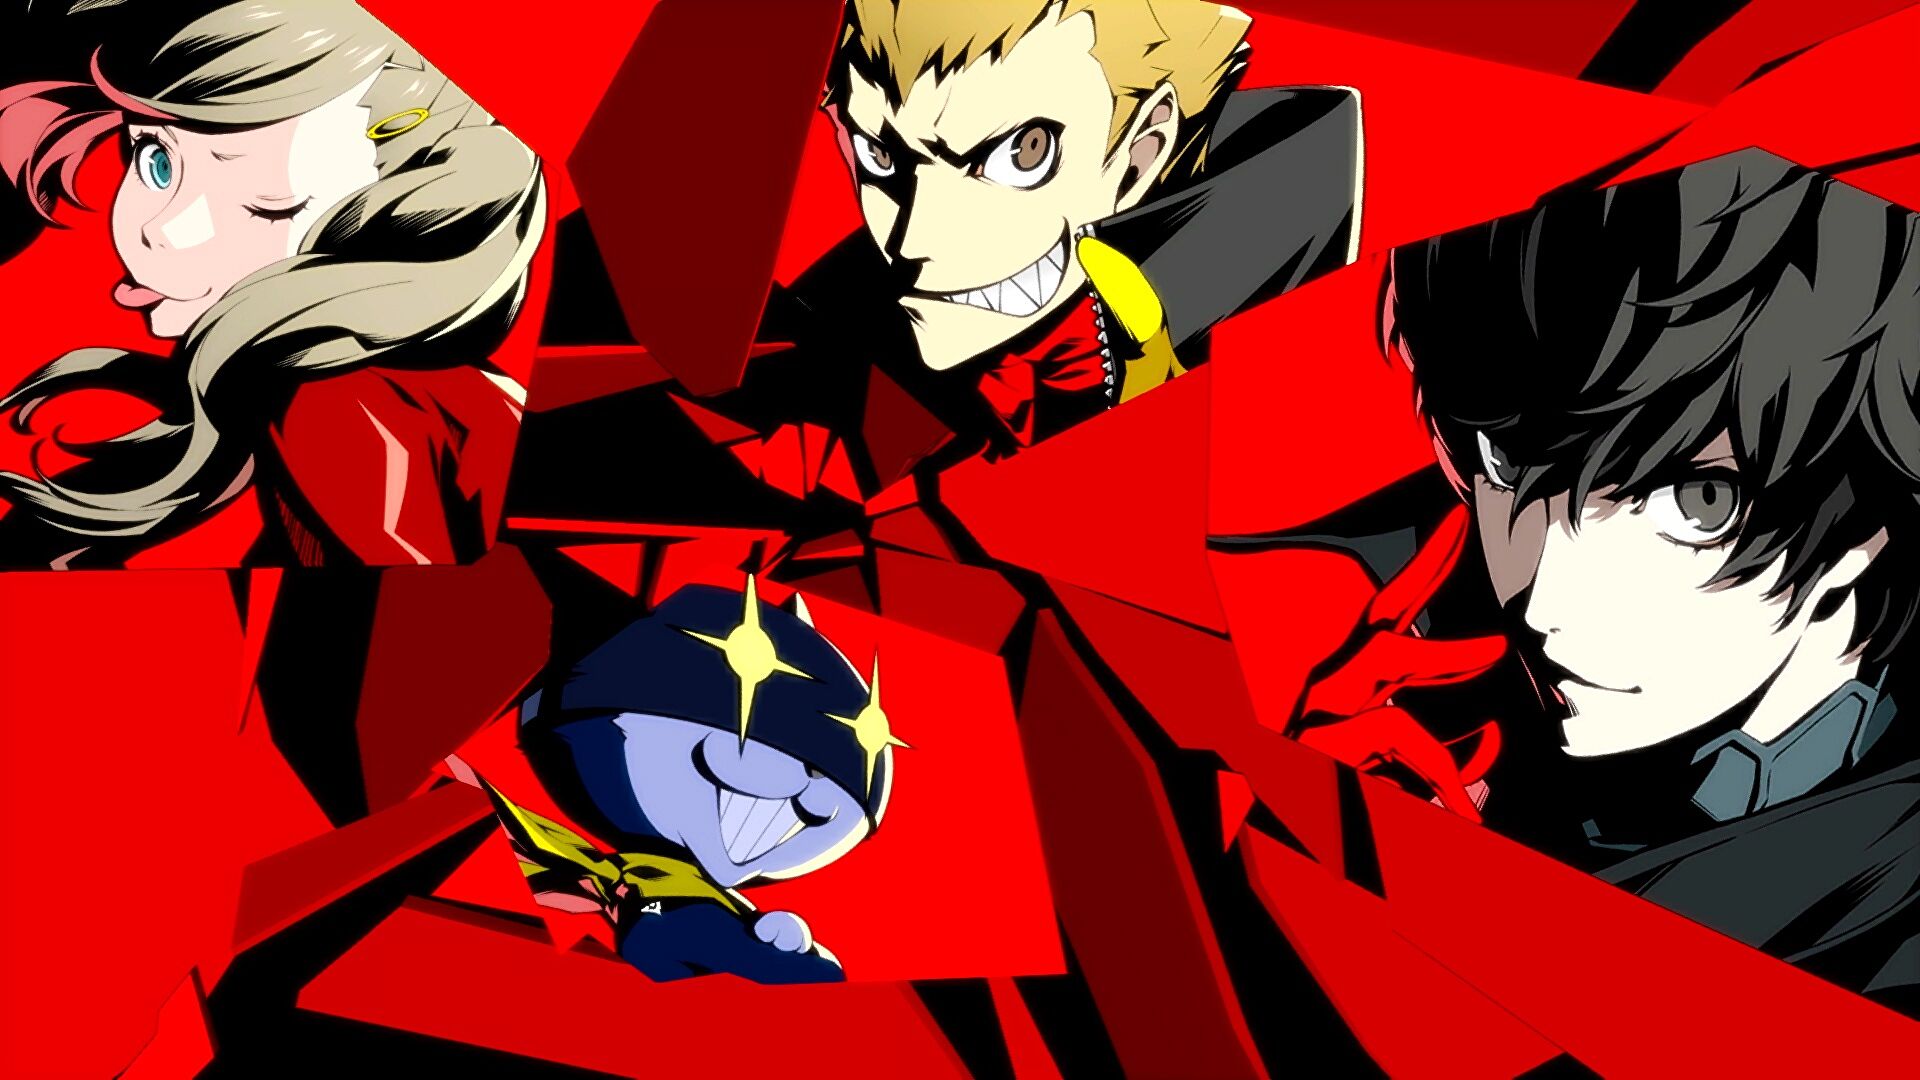 Persona 5 Royal and Persona 3 Portable are coming to Steam after all